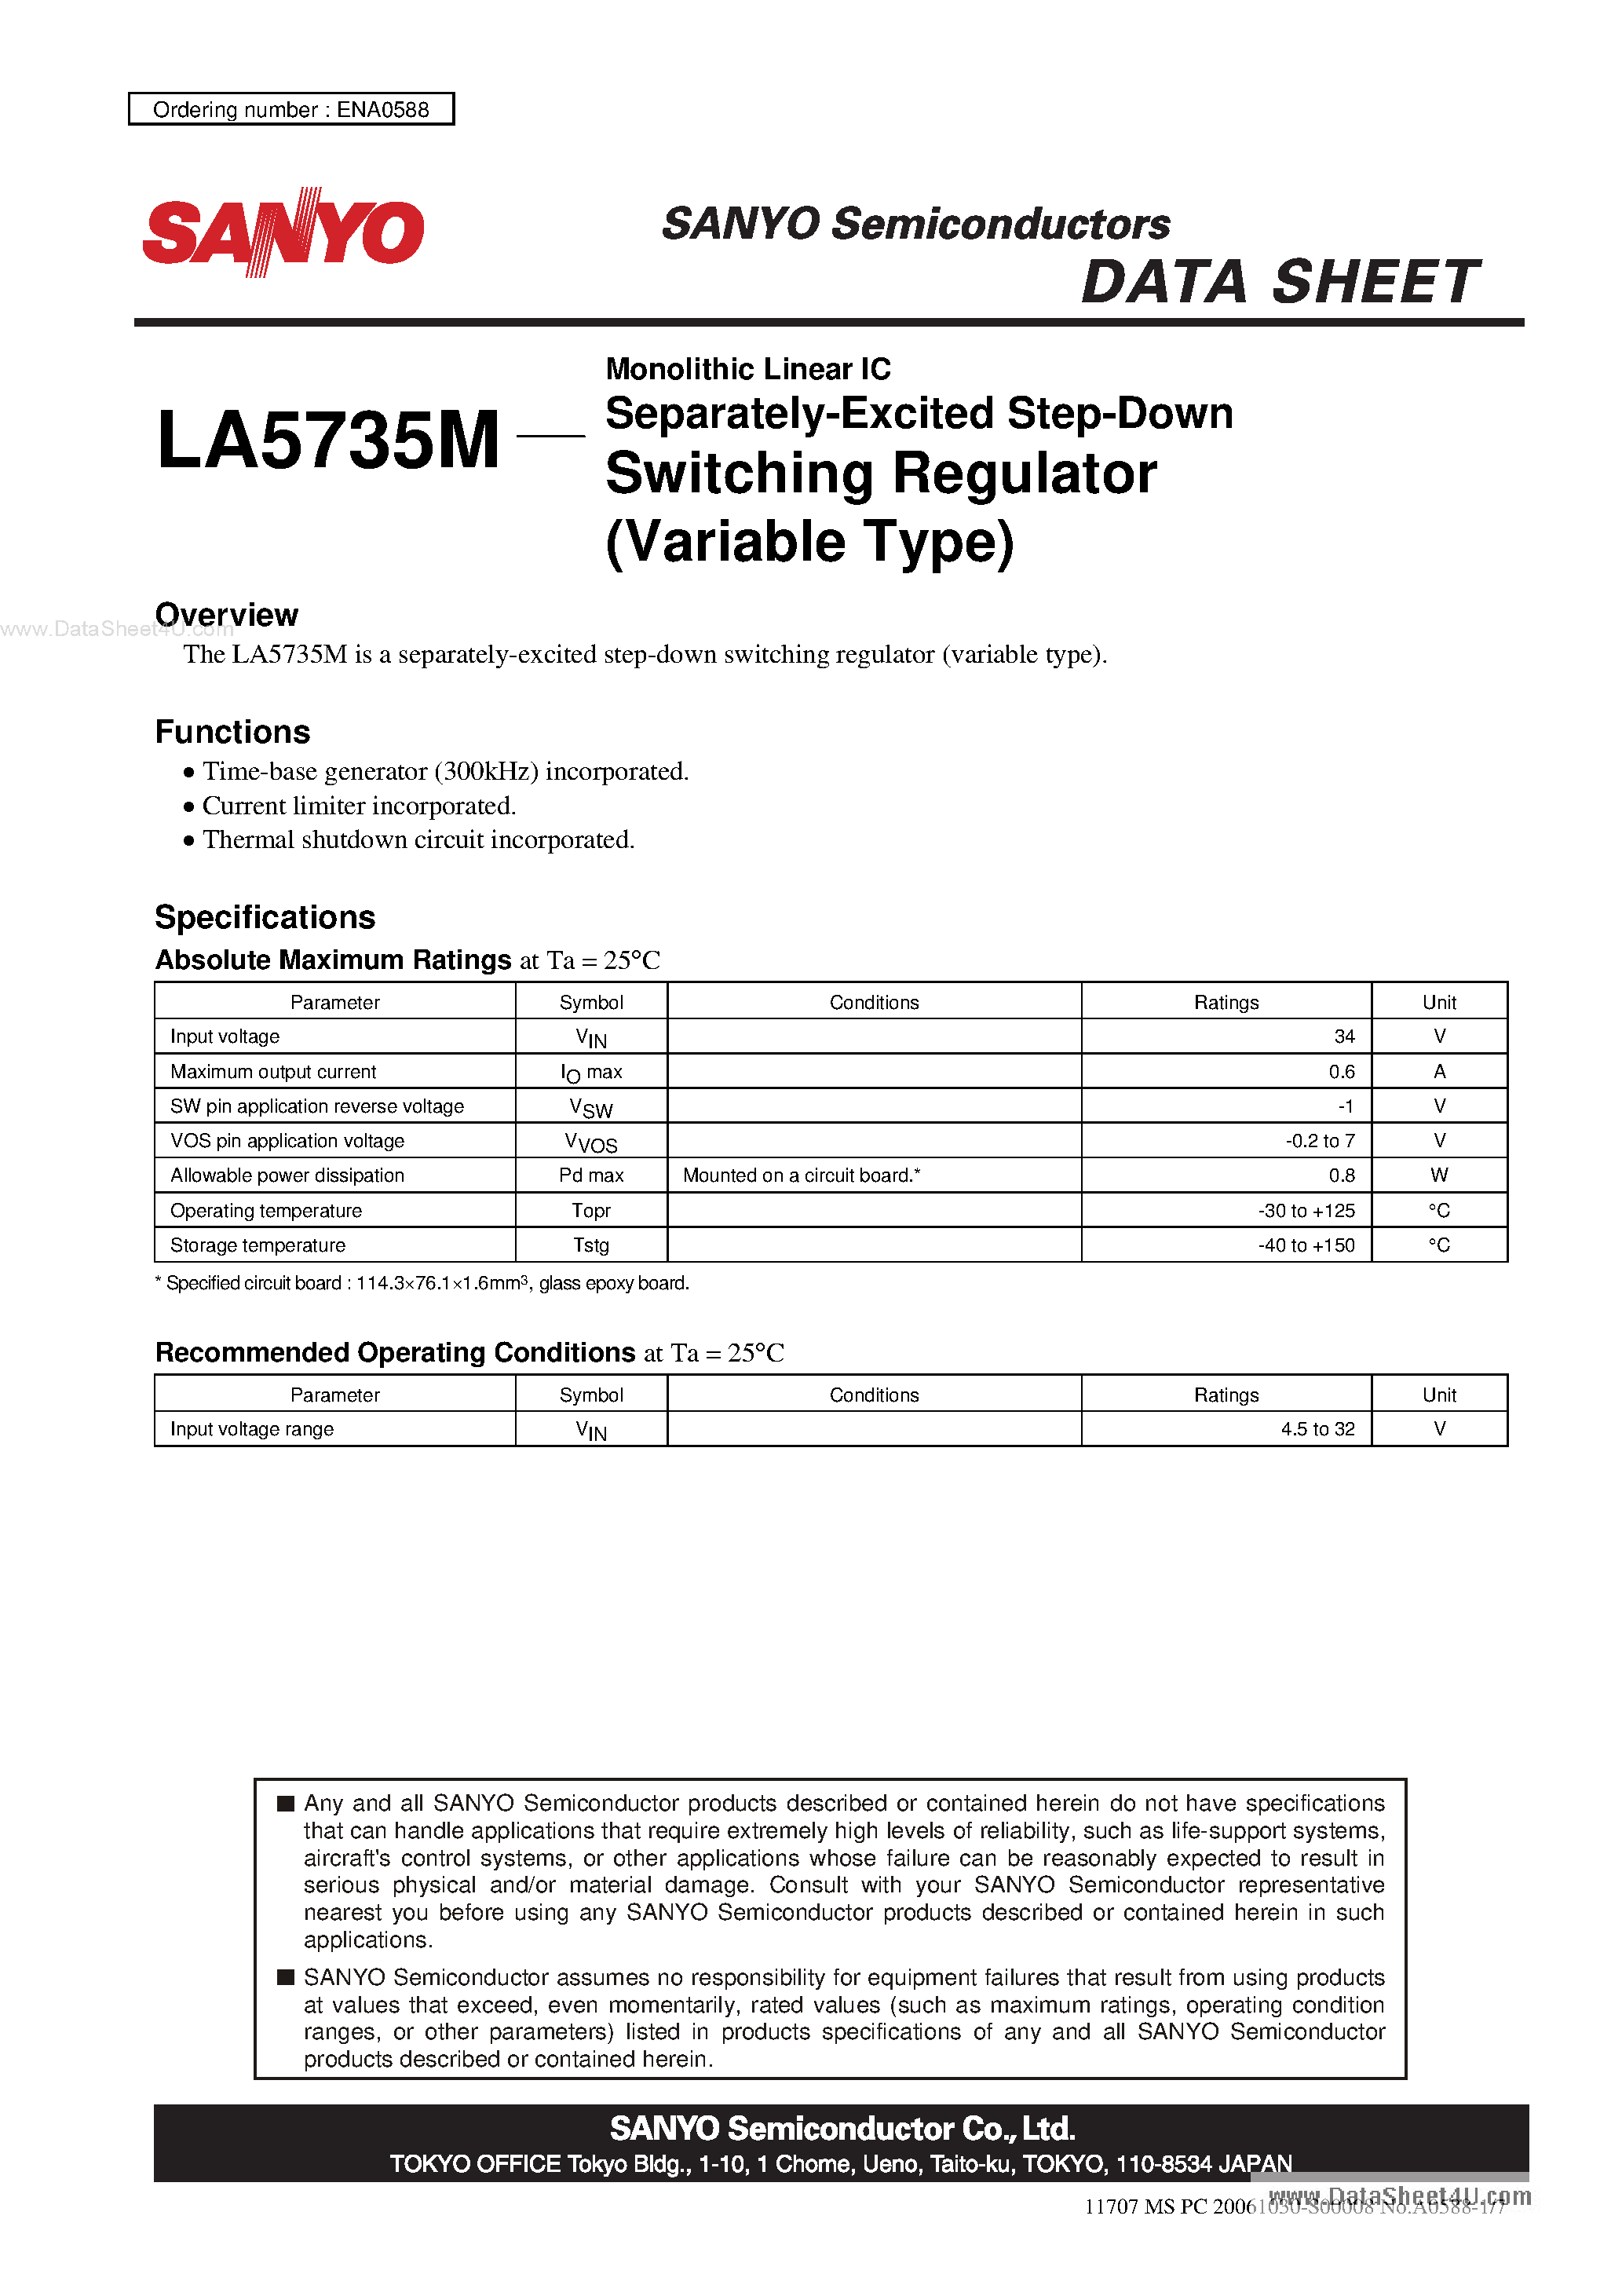 Datasheet LA5735M - Monolithic Linear IC Separately-Excited Step-Down Switching Regulator page 1